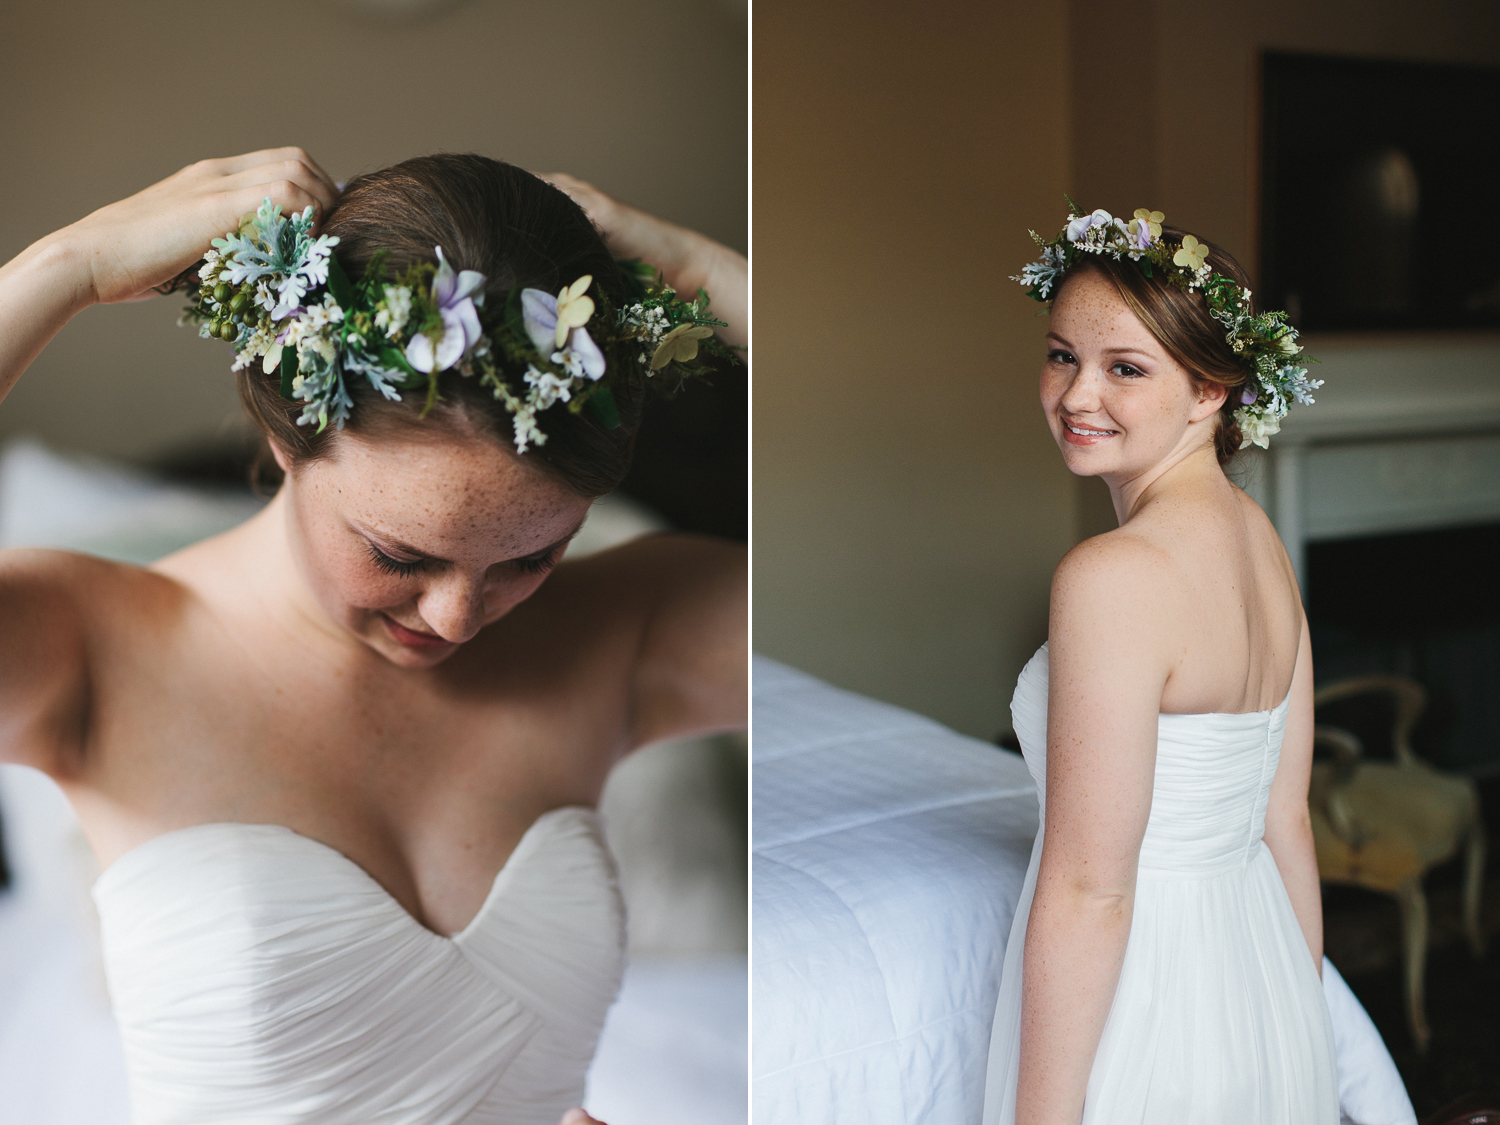 Bride with a floral crown